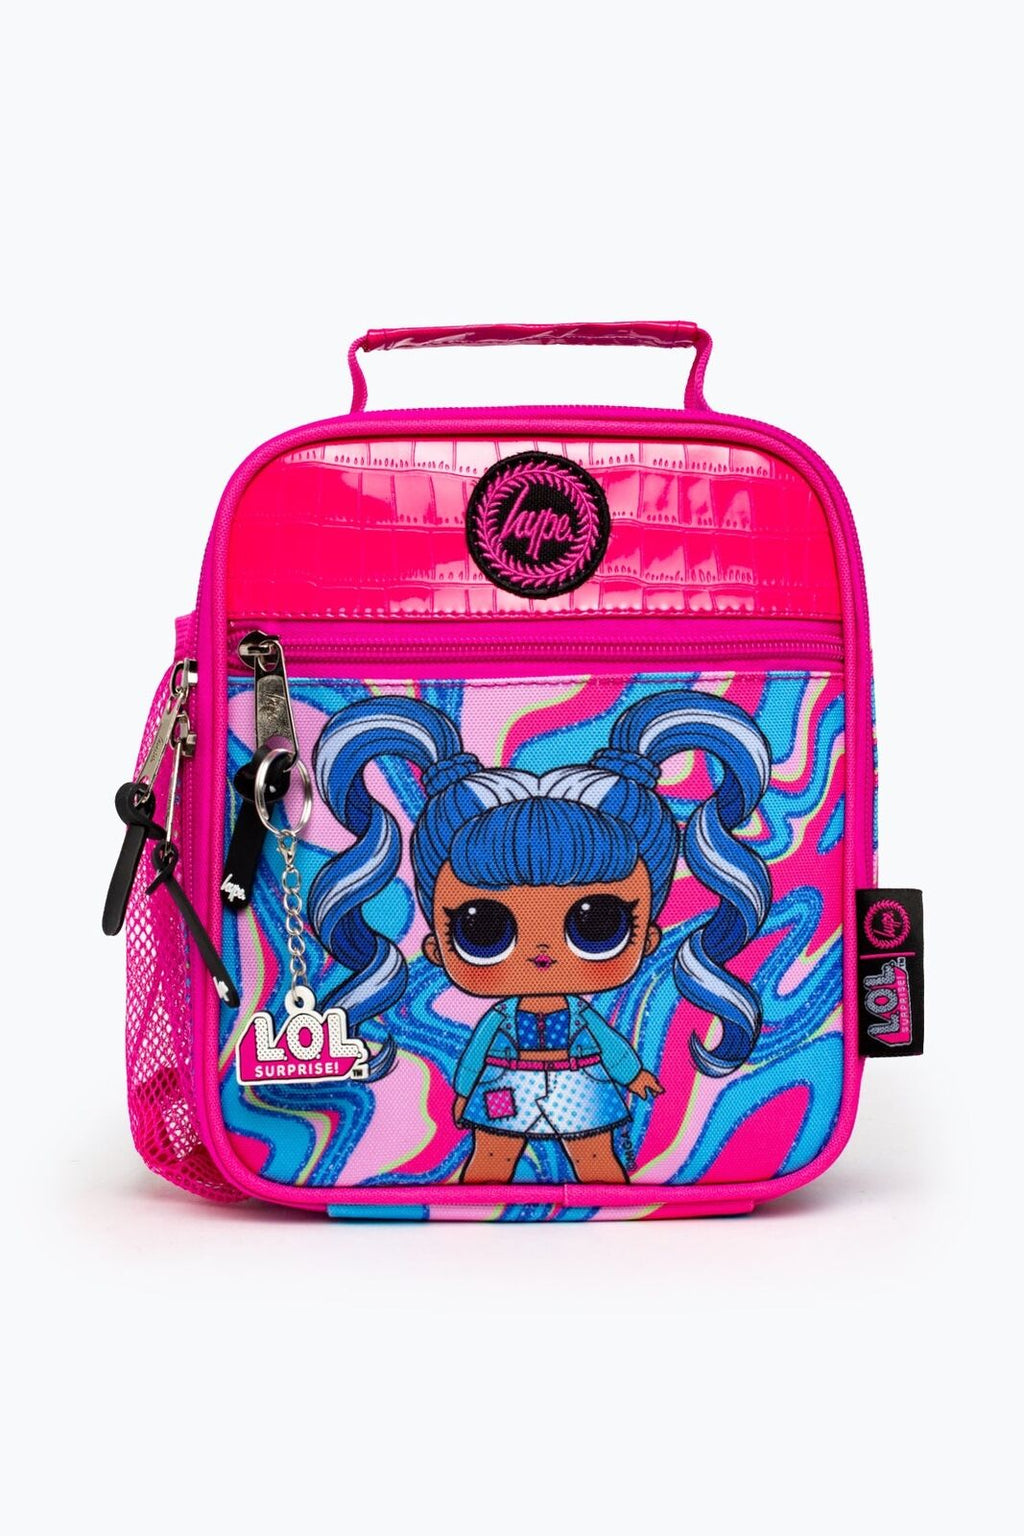 Hype x L.O.L. Surprise Blue Sweet Tooth Lunch Box